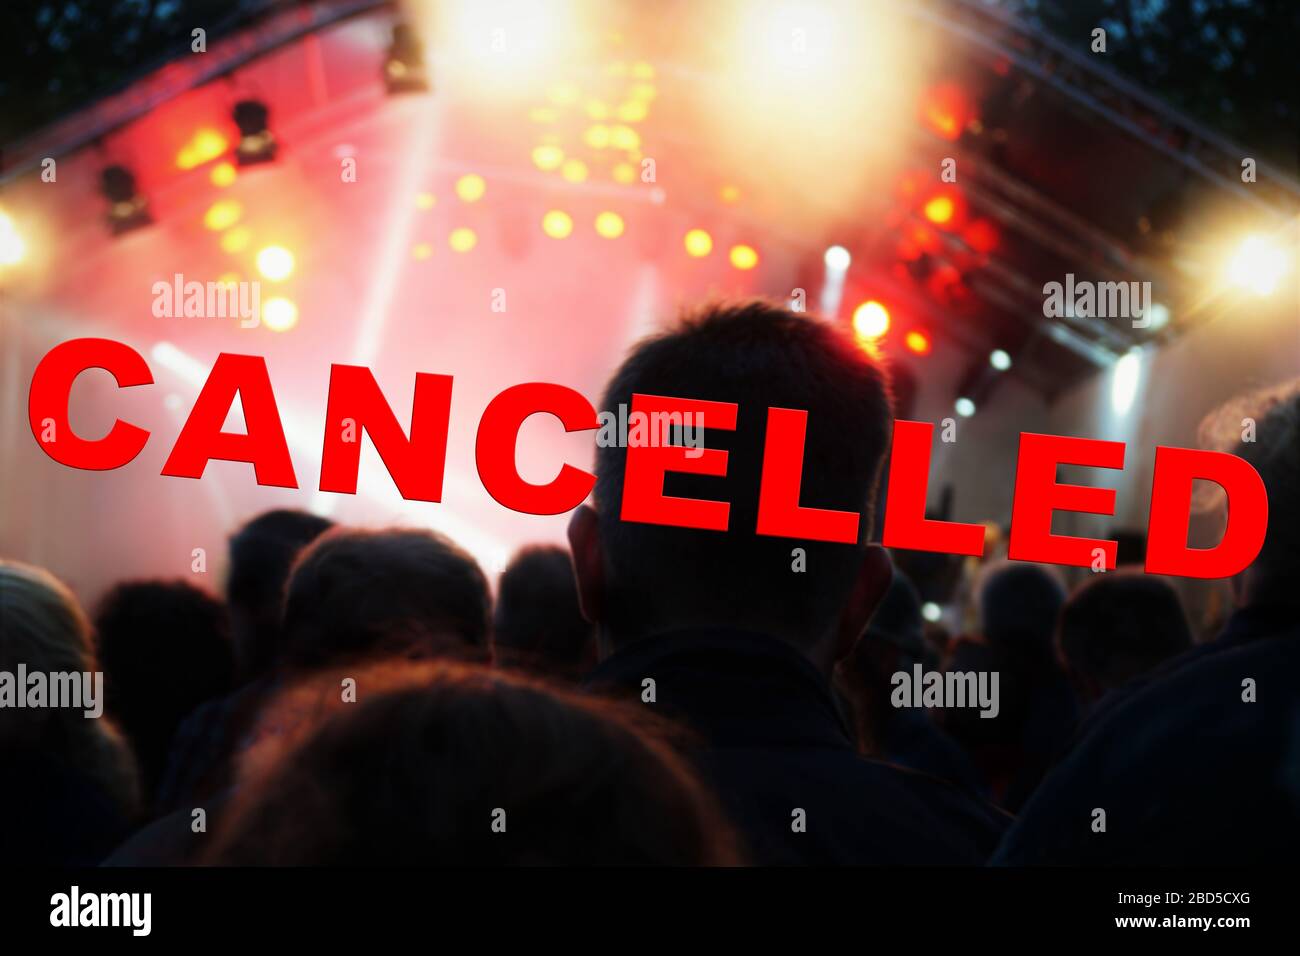 cancelled music festival or concert event due to ban on public gathering Stock Photo